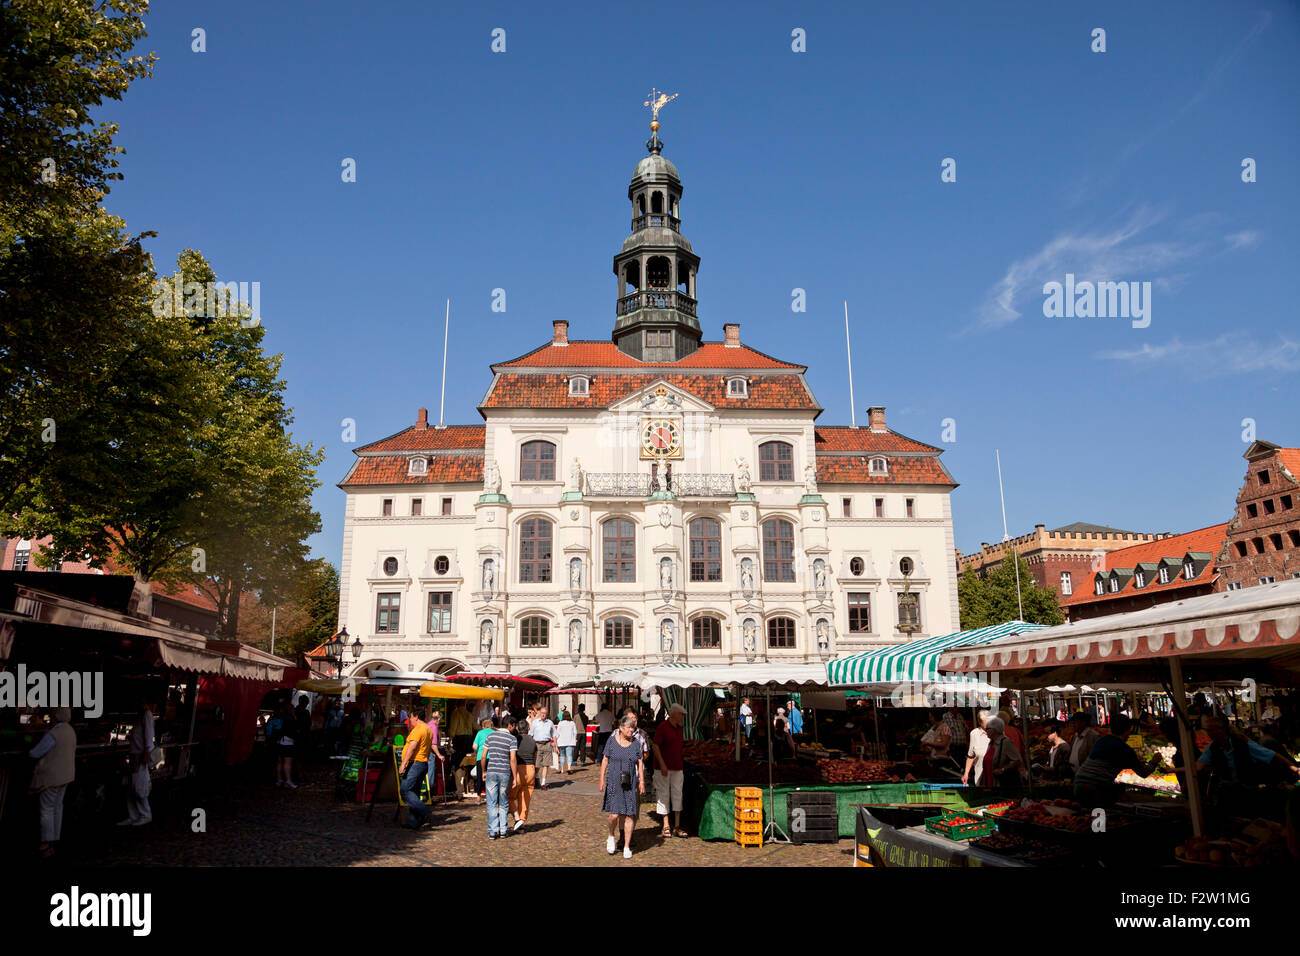 historic town hall and market, Hanseatic Town of Lüneburg, Lower Saxony, Germany Stock Photo